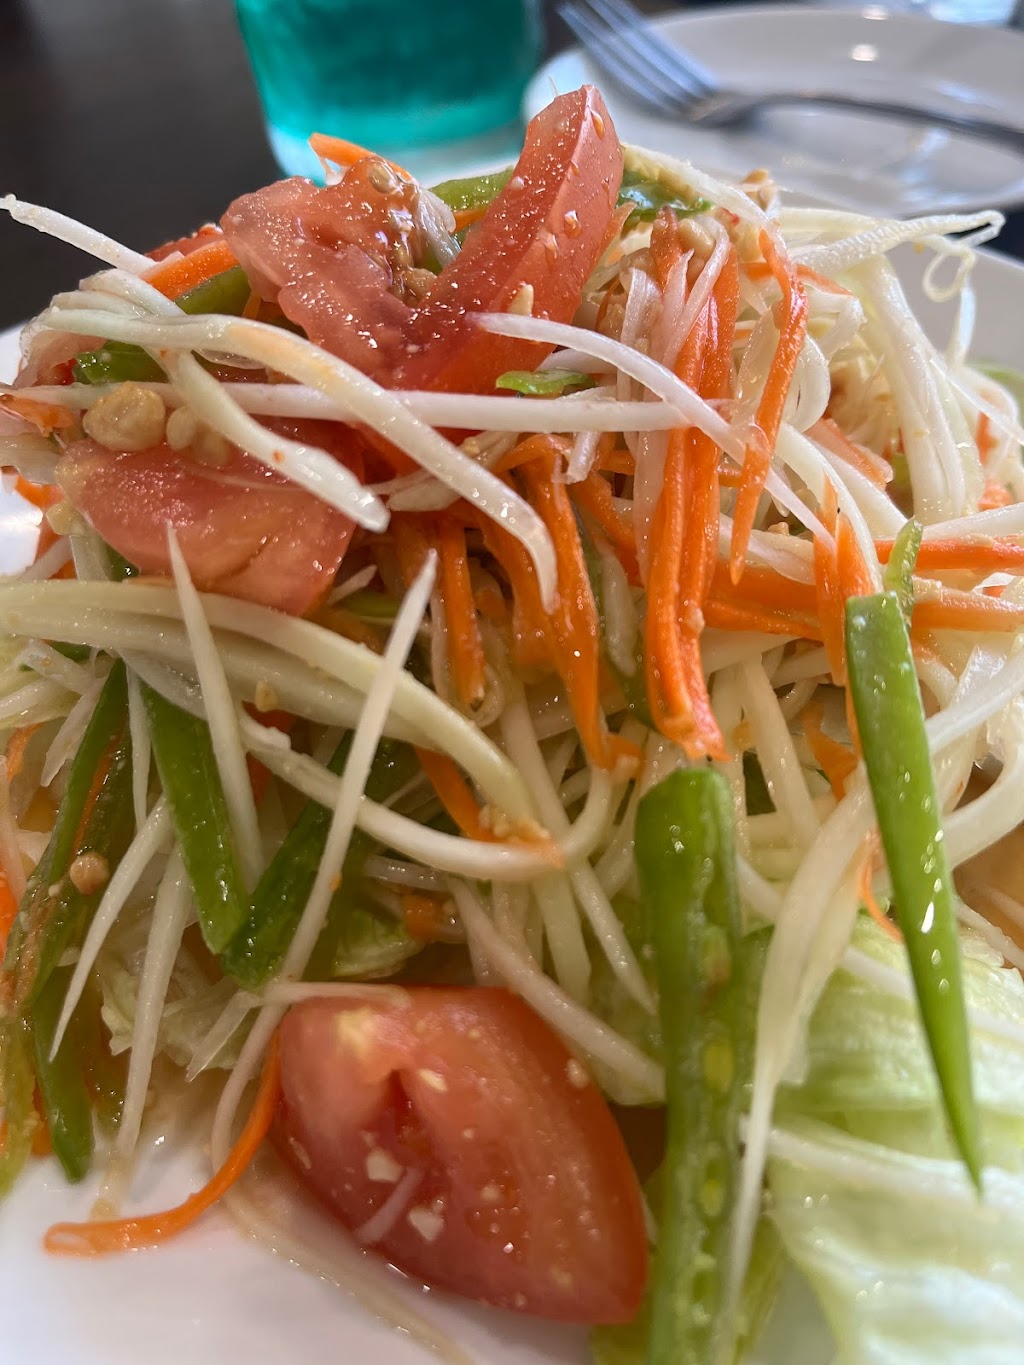 Prik Thai Kitchen | 47-16 30th Ave., Queens, NY 11103 | Phone: (718) 777-1502